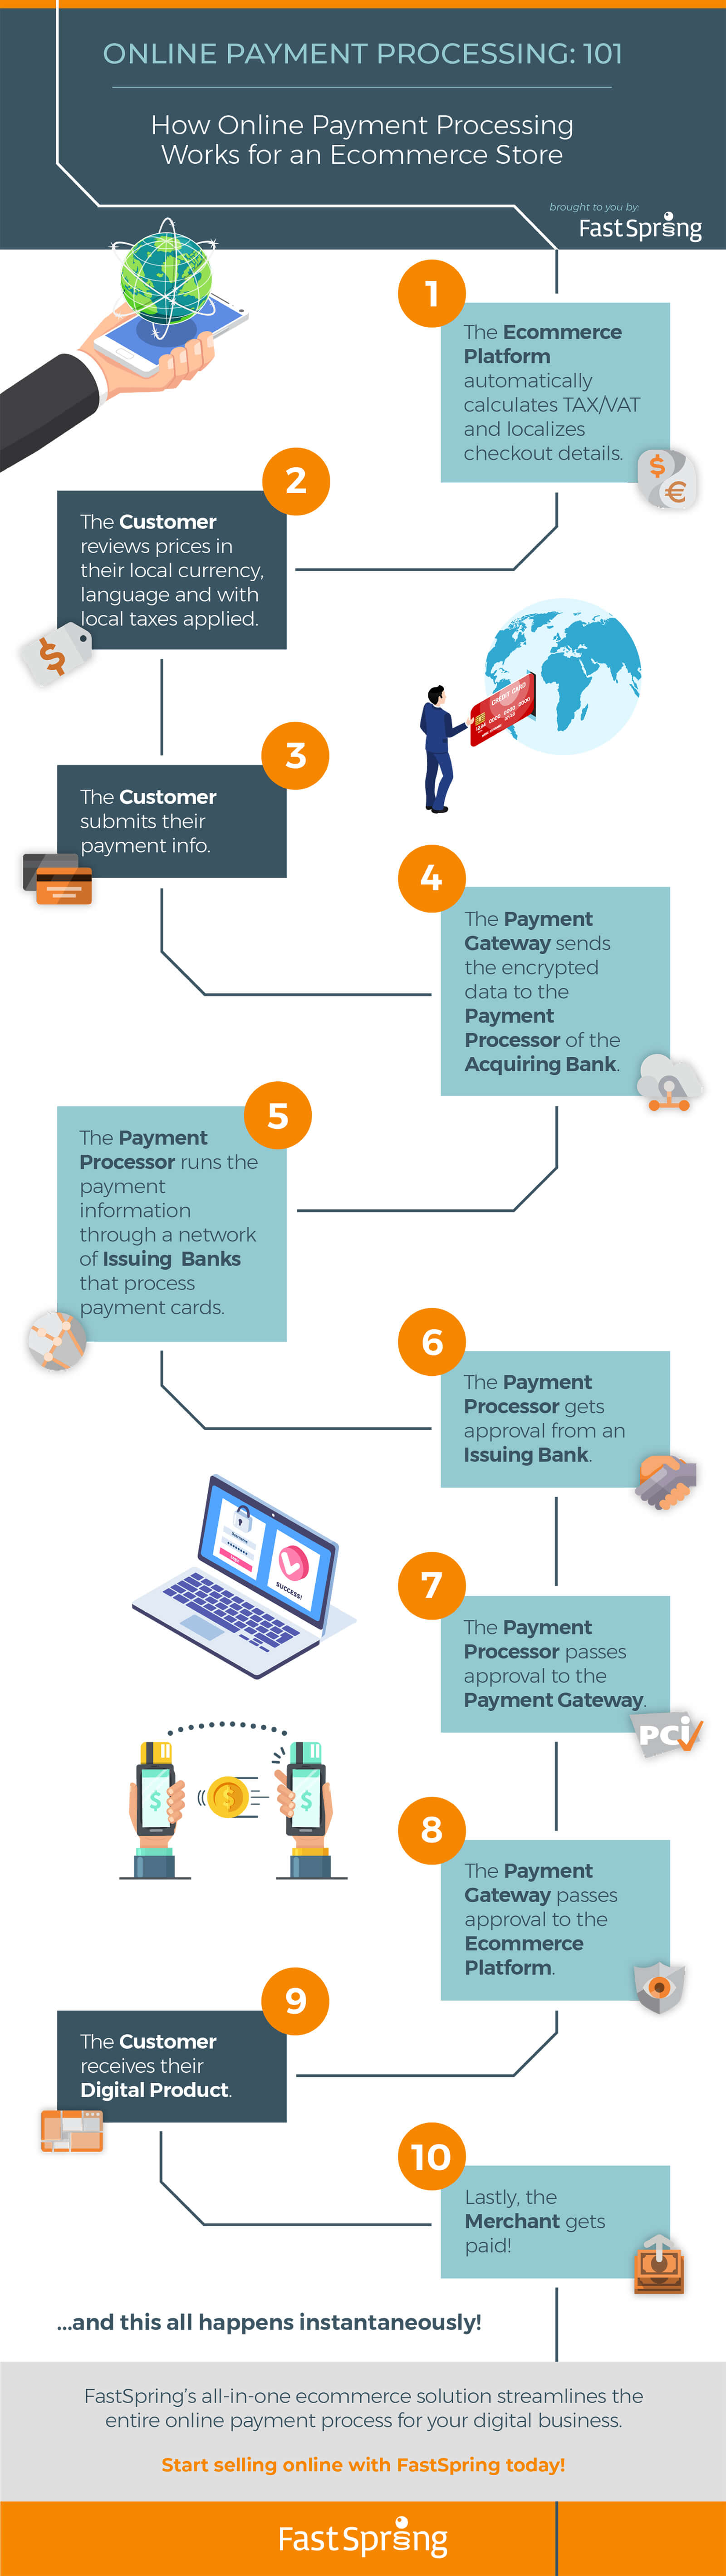 FastSpring Online Payments for Digital Business infographic